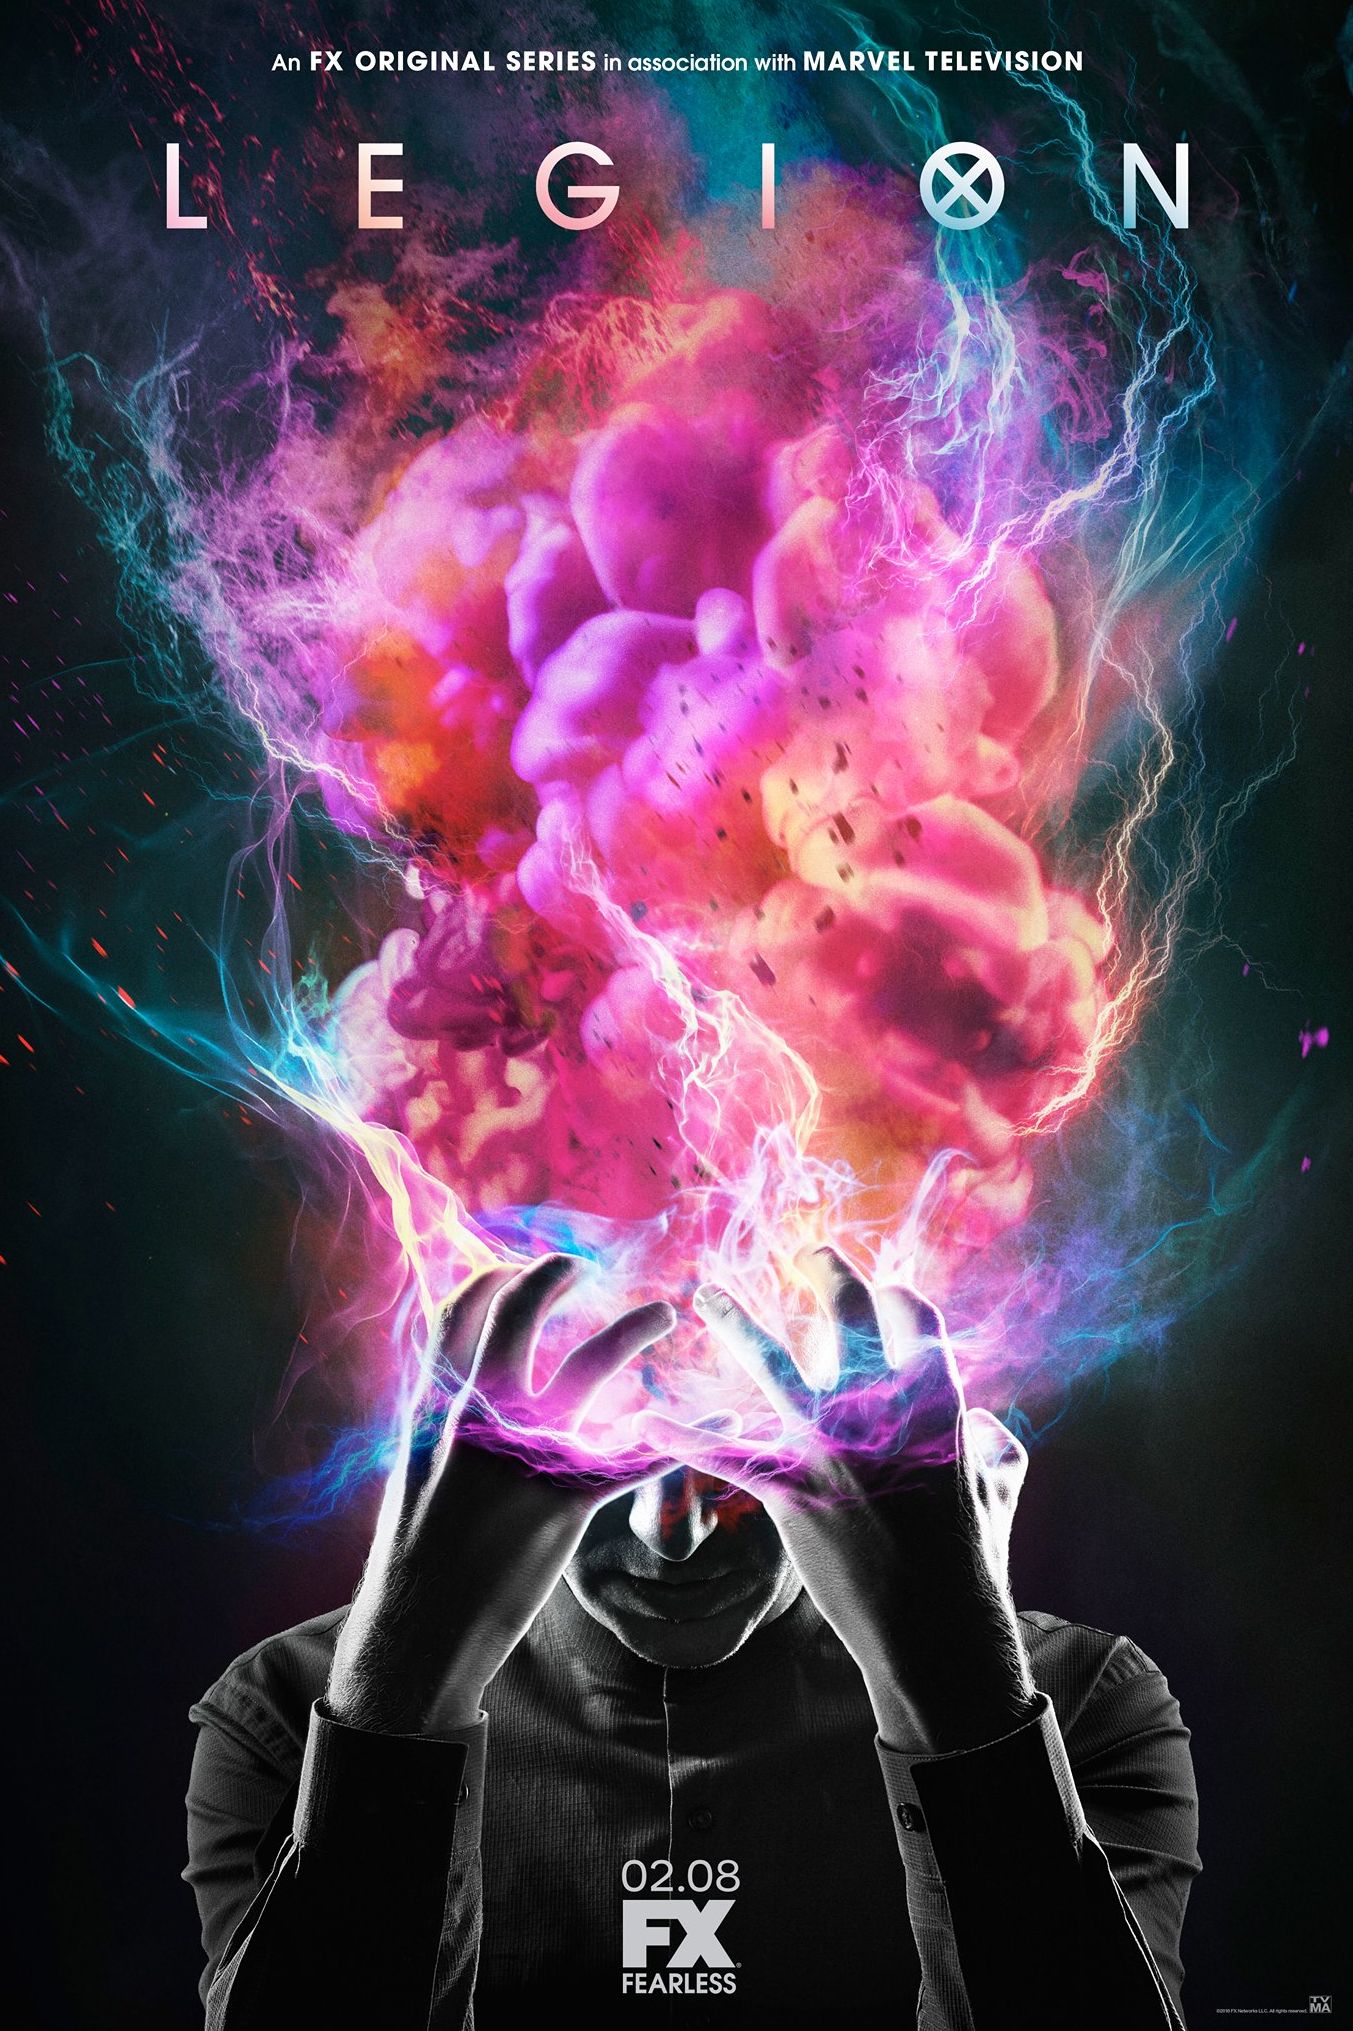 Mind-blowing new poster for FX&#039;s &#039;Legion&#039;